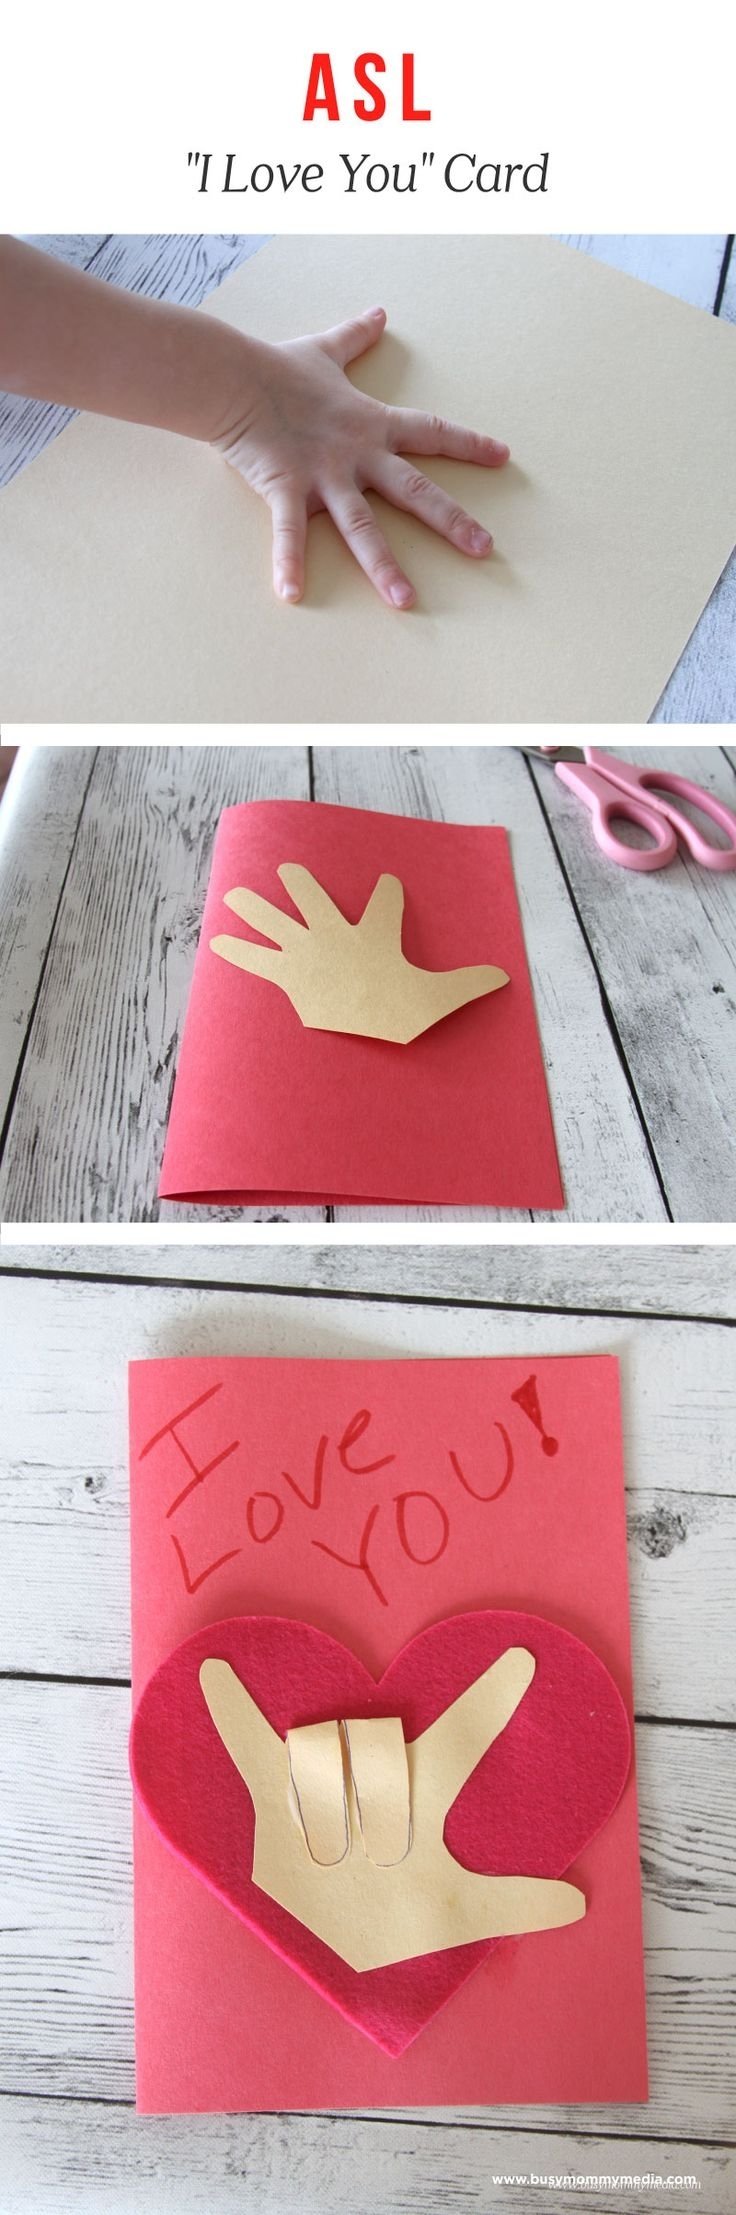 10 Attractive Craft Ideas For Valentines Day 2846 best crafts for children images on pinterest infant crafts 2022